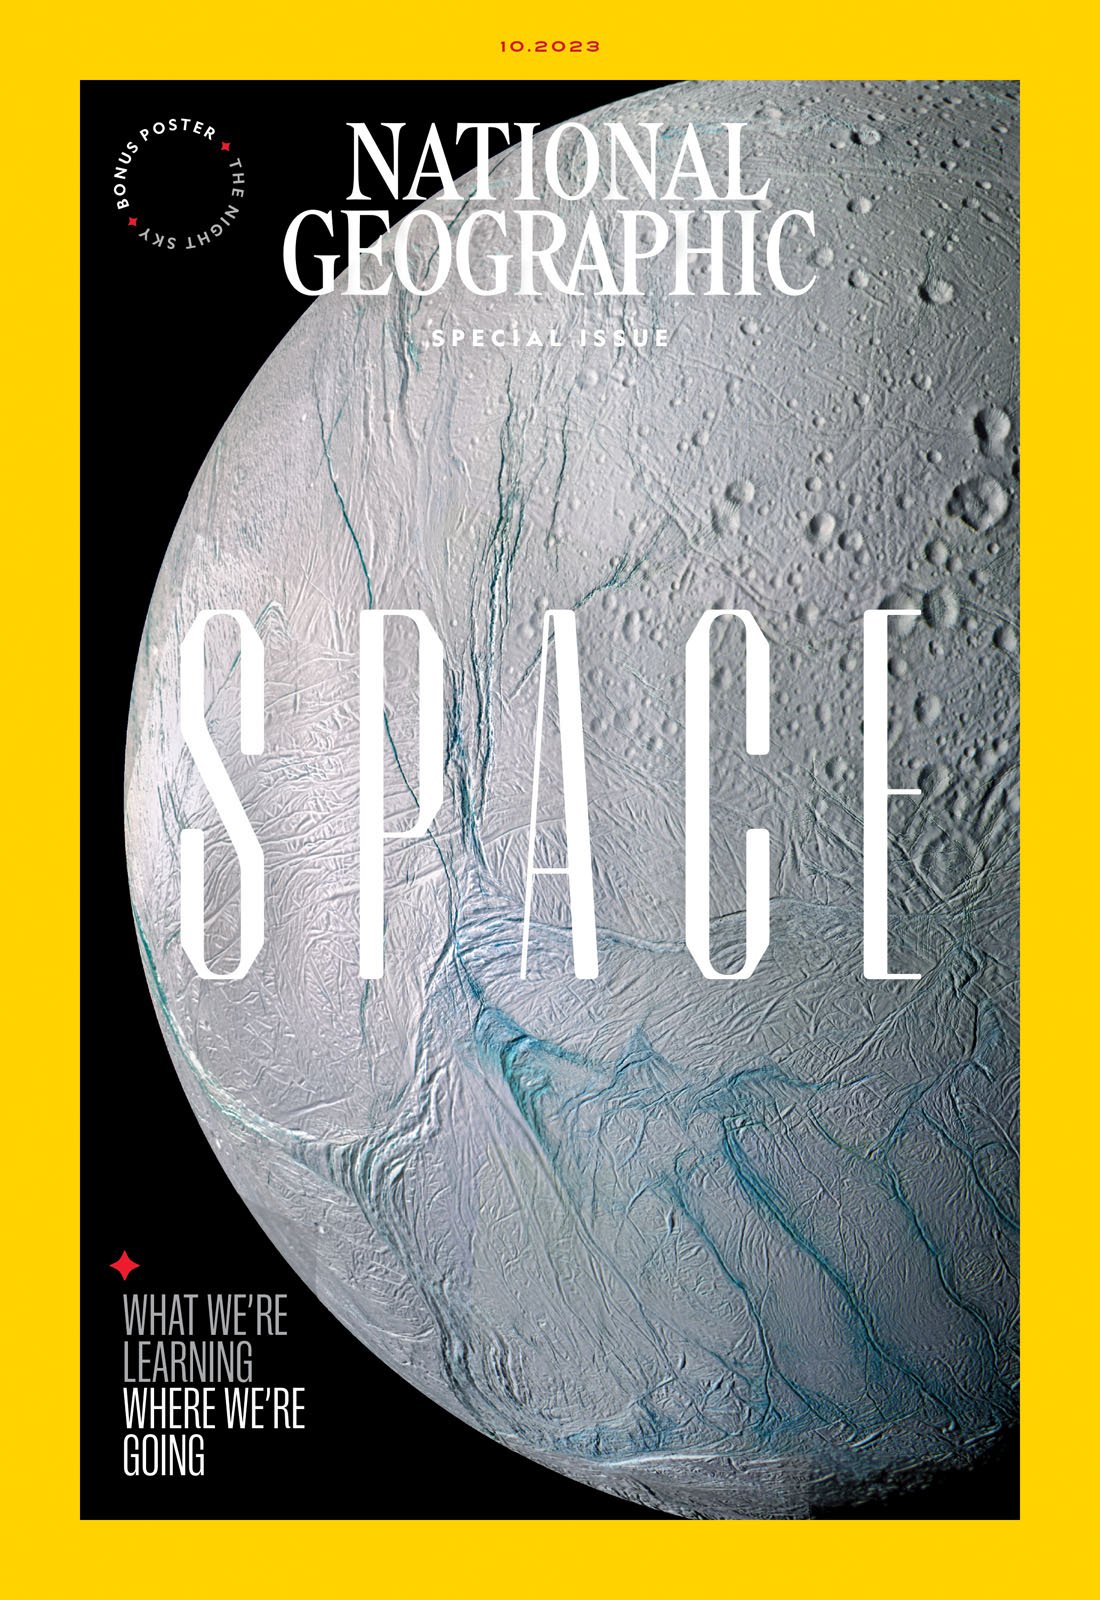 National Geographic Space Issue